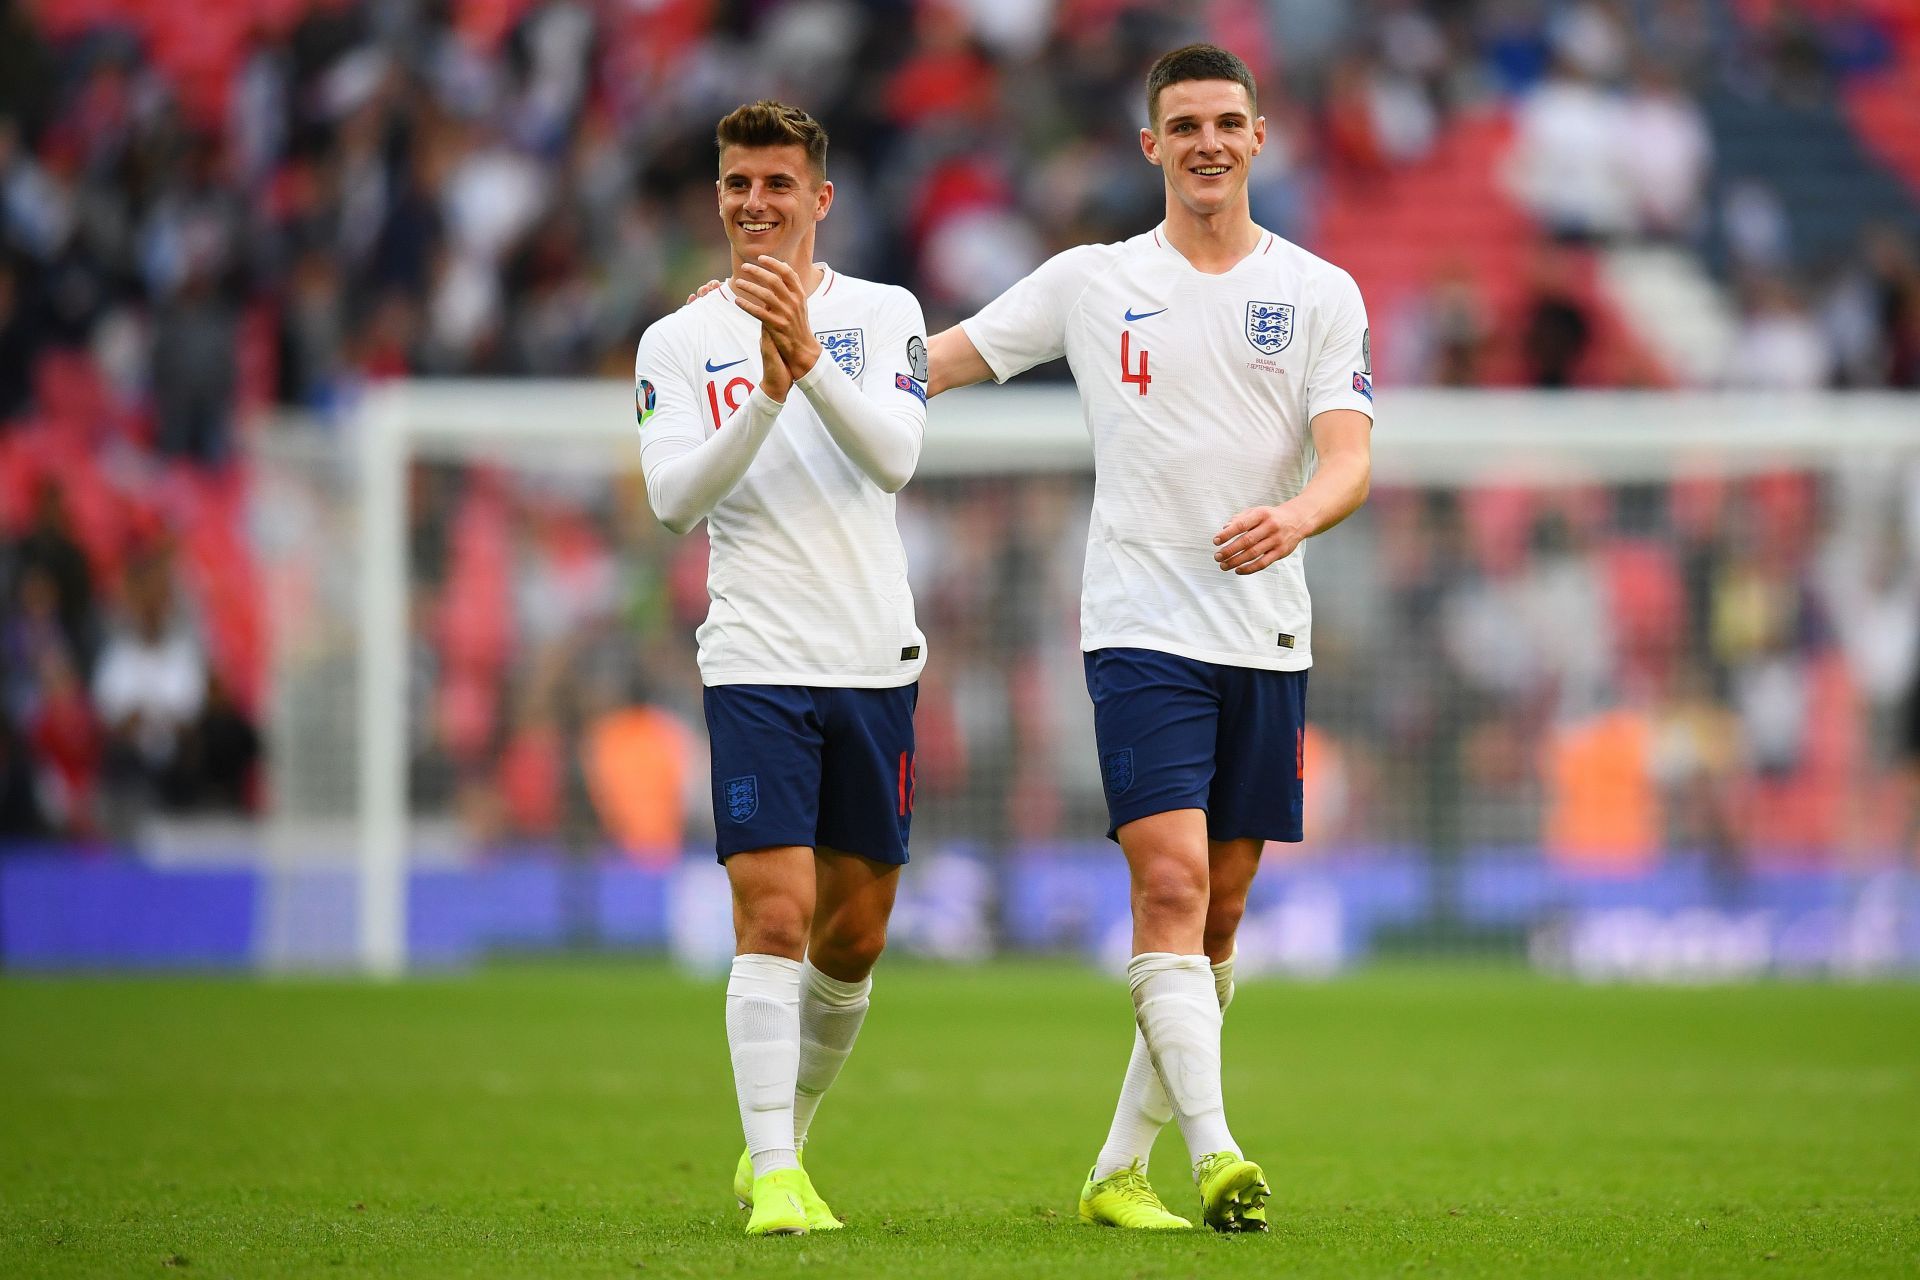 Manchester United want Mason Mount (left) and Declan Rice.